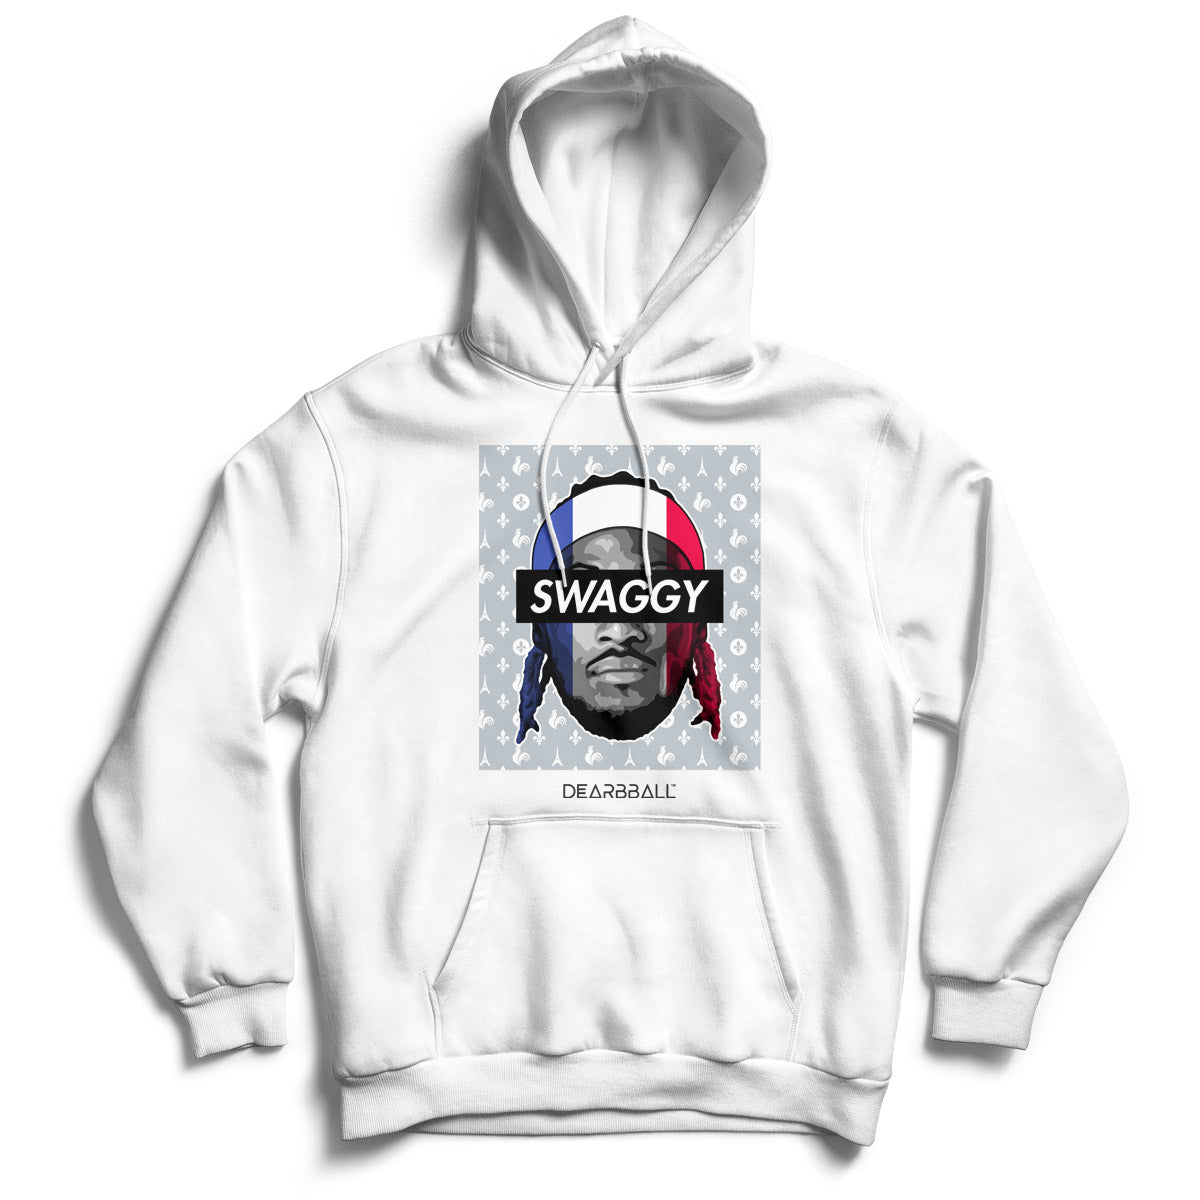 DearBBall Sweat à Capuche - SWAGGY France Royauté Edition